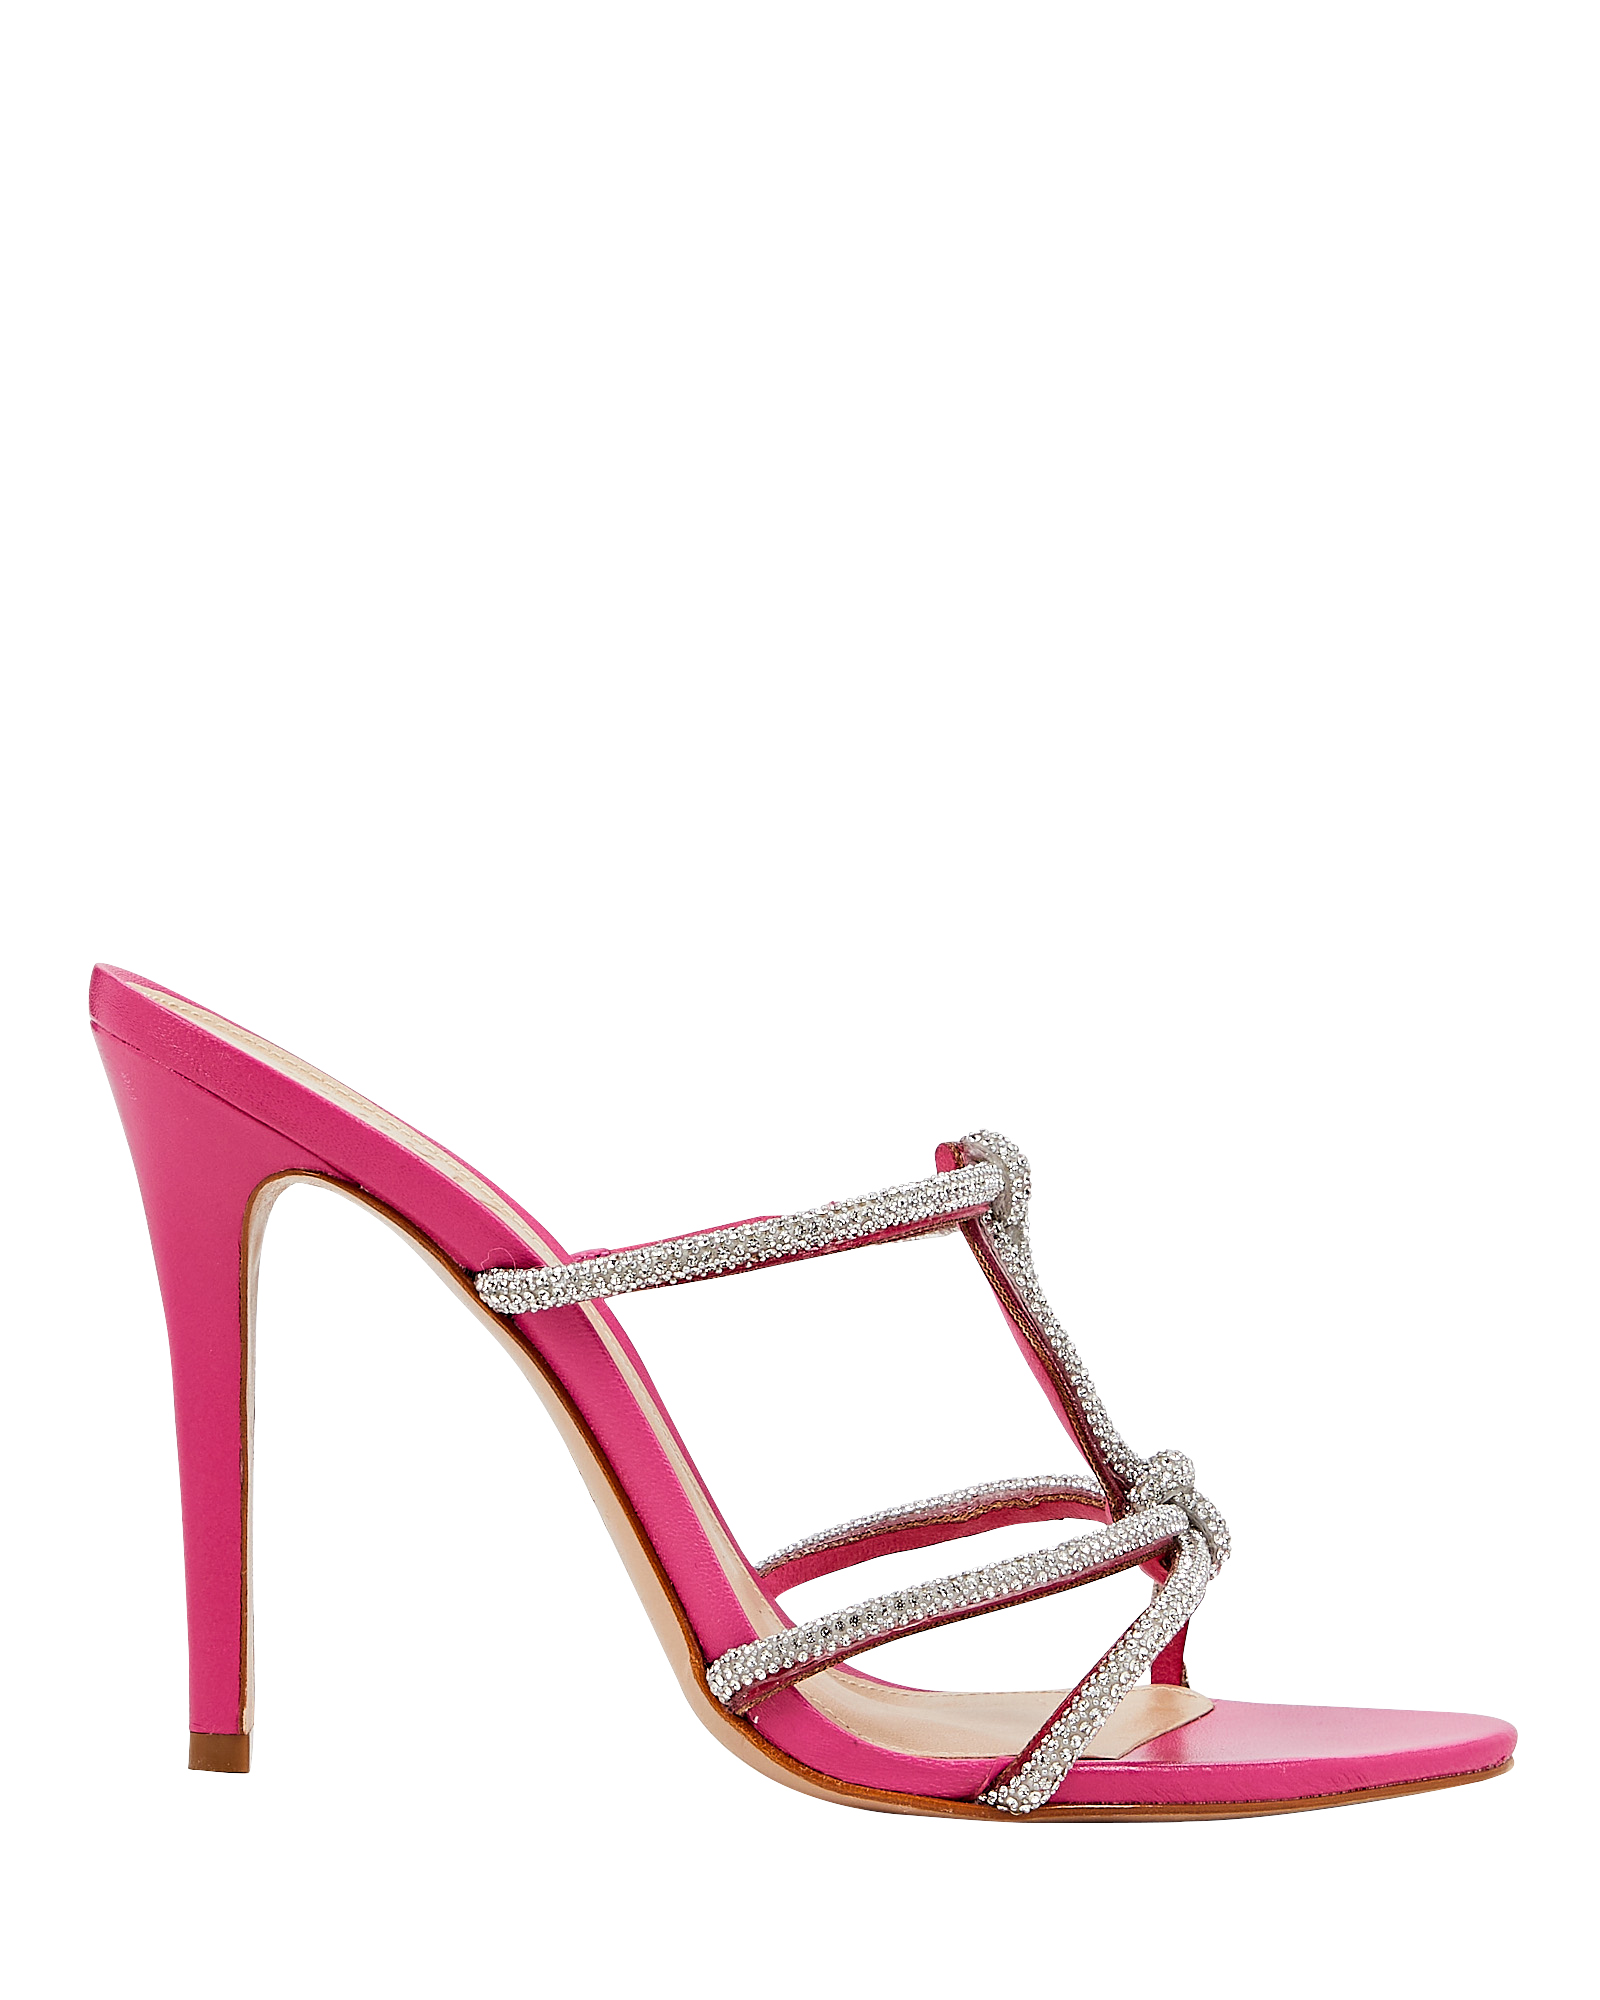 Schutz Naia Crystal-Embellished Mules In Pink | INTERMIX®